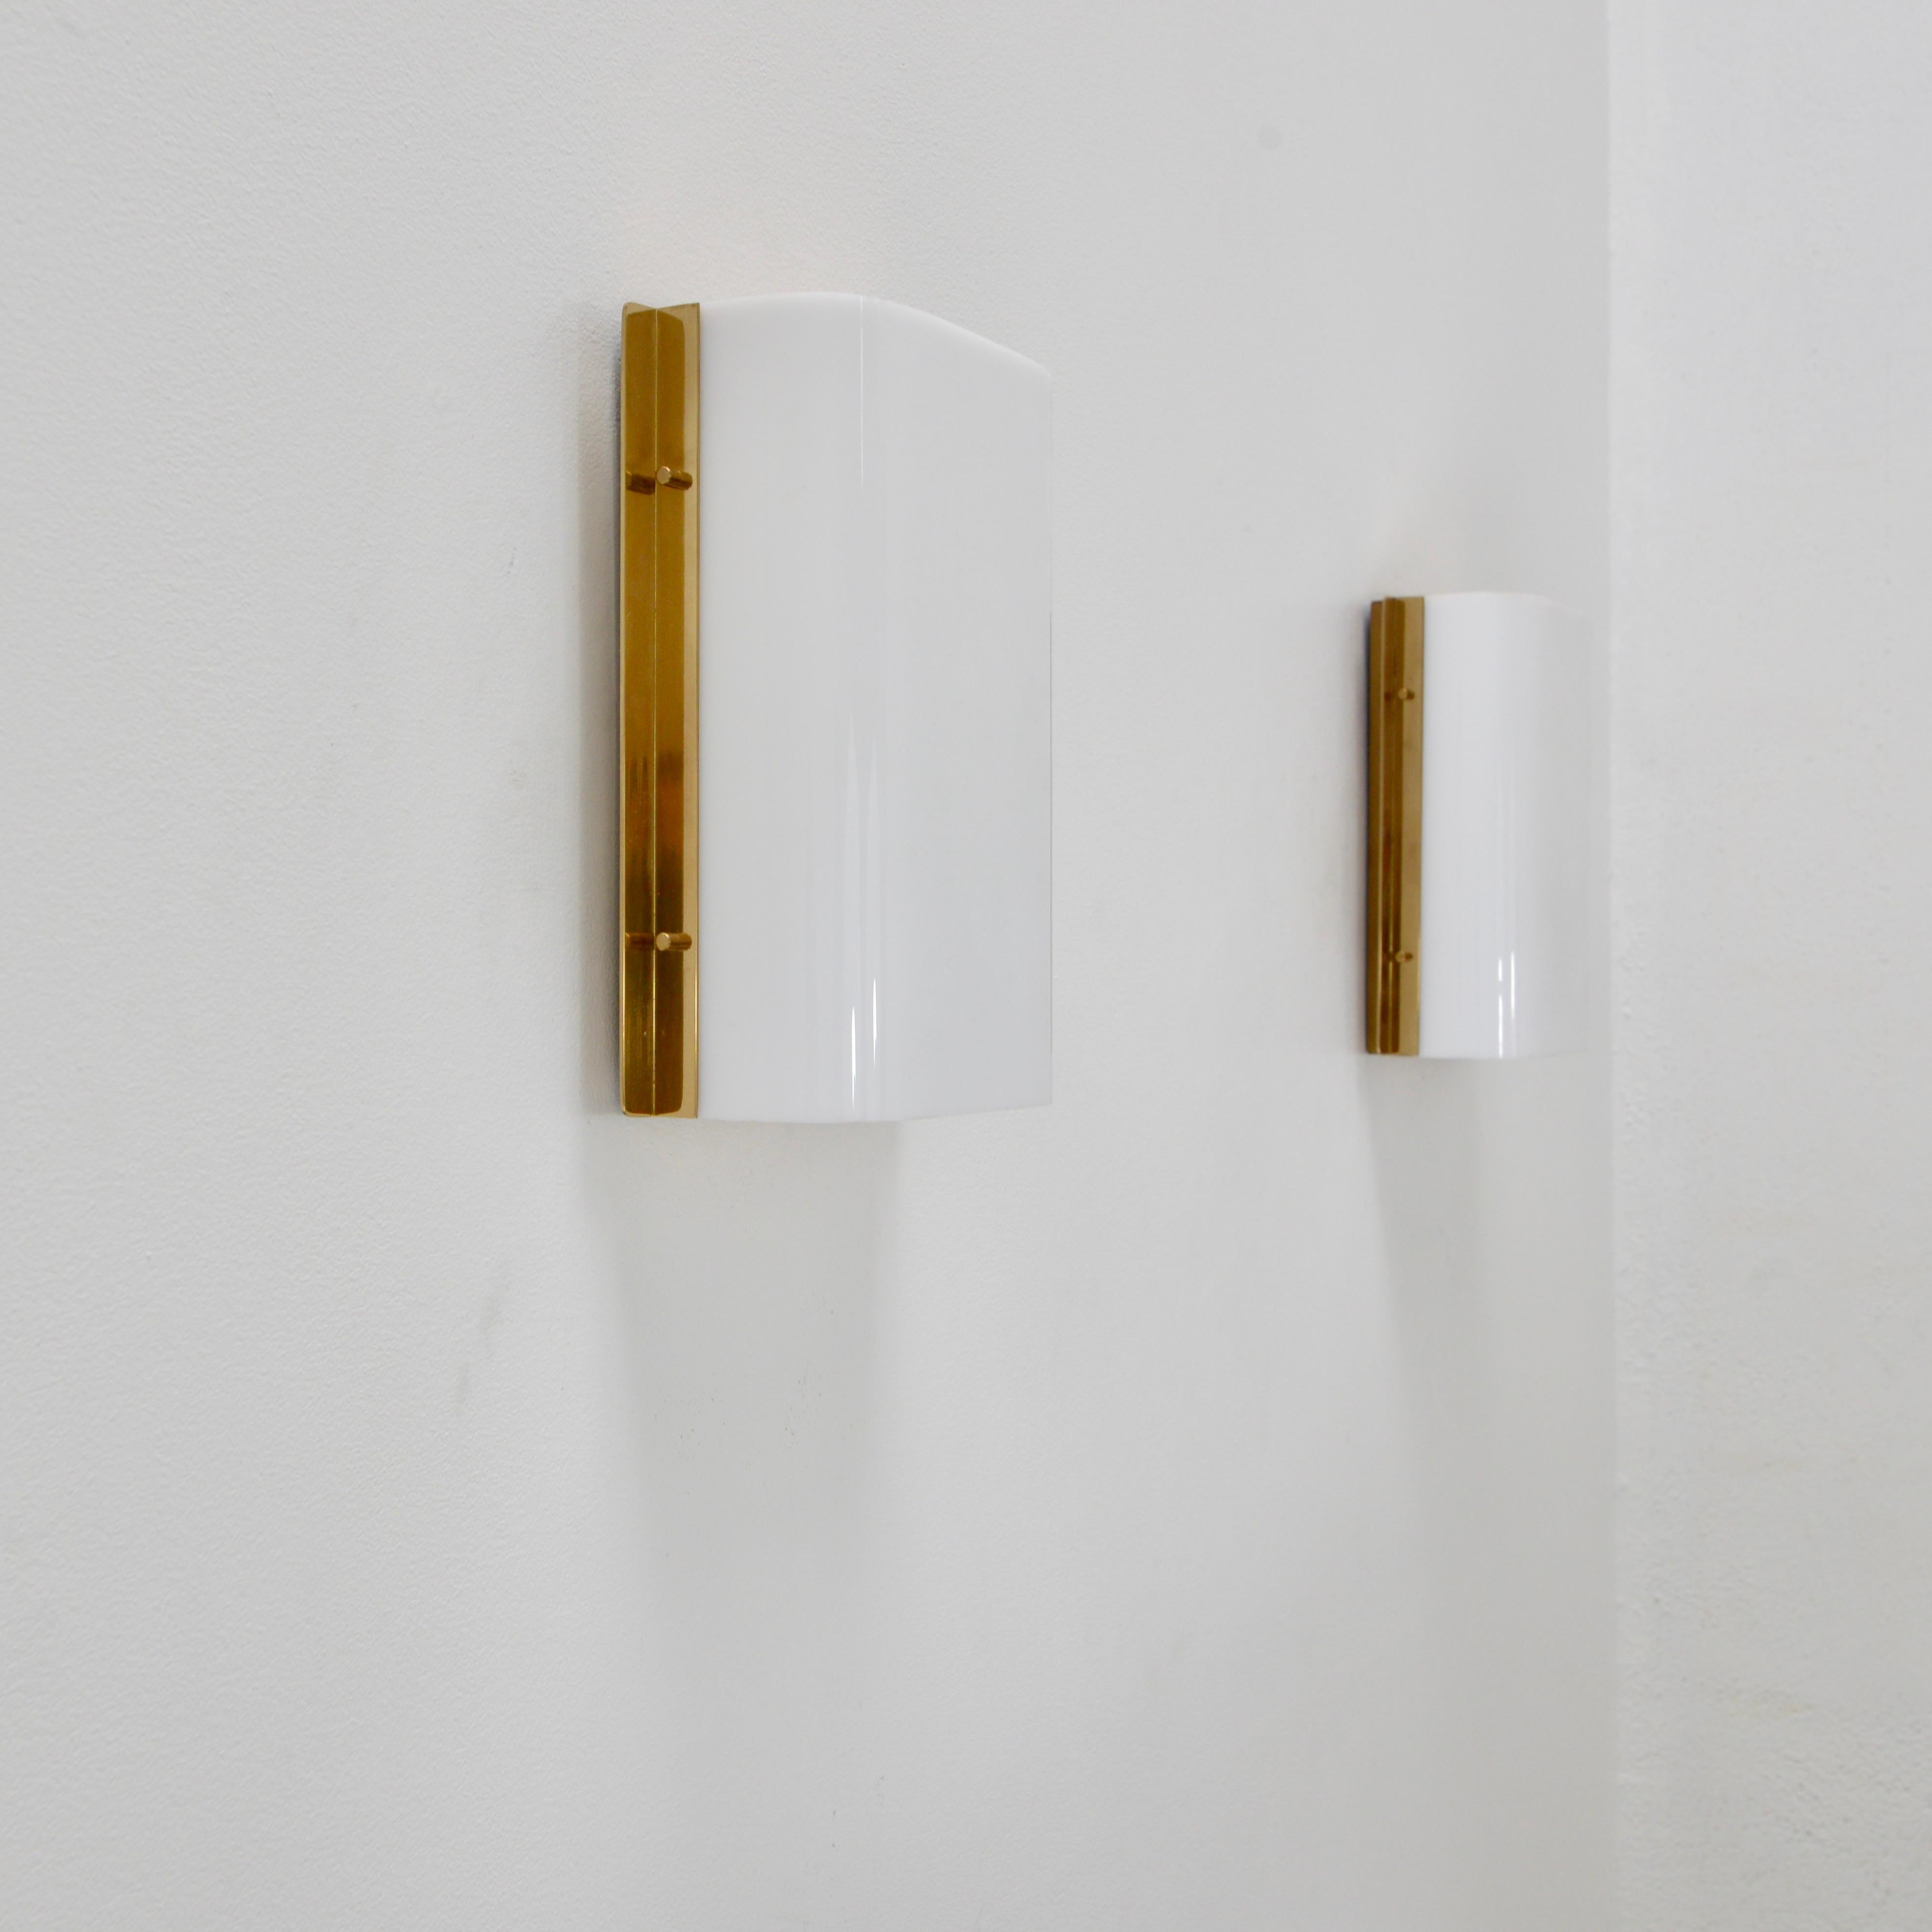 Elegant pair of Italian rectangular sconces from the1950s by Stilux. In brass, aluminum and acrylic Naturally aged. (2) E26 medium based sockets per sconce. Priced as a pair. Wired for use in the US. Lightbulbs included with